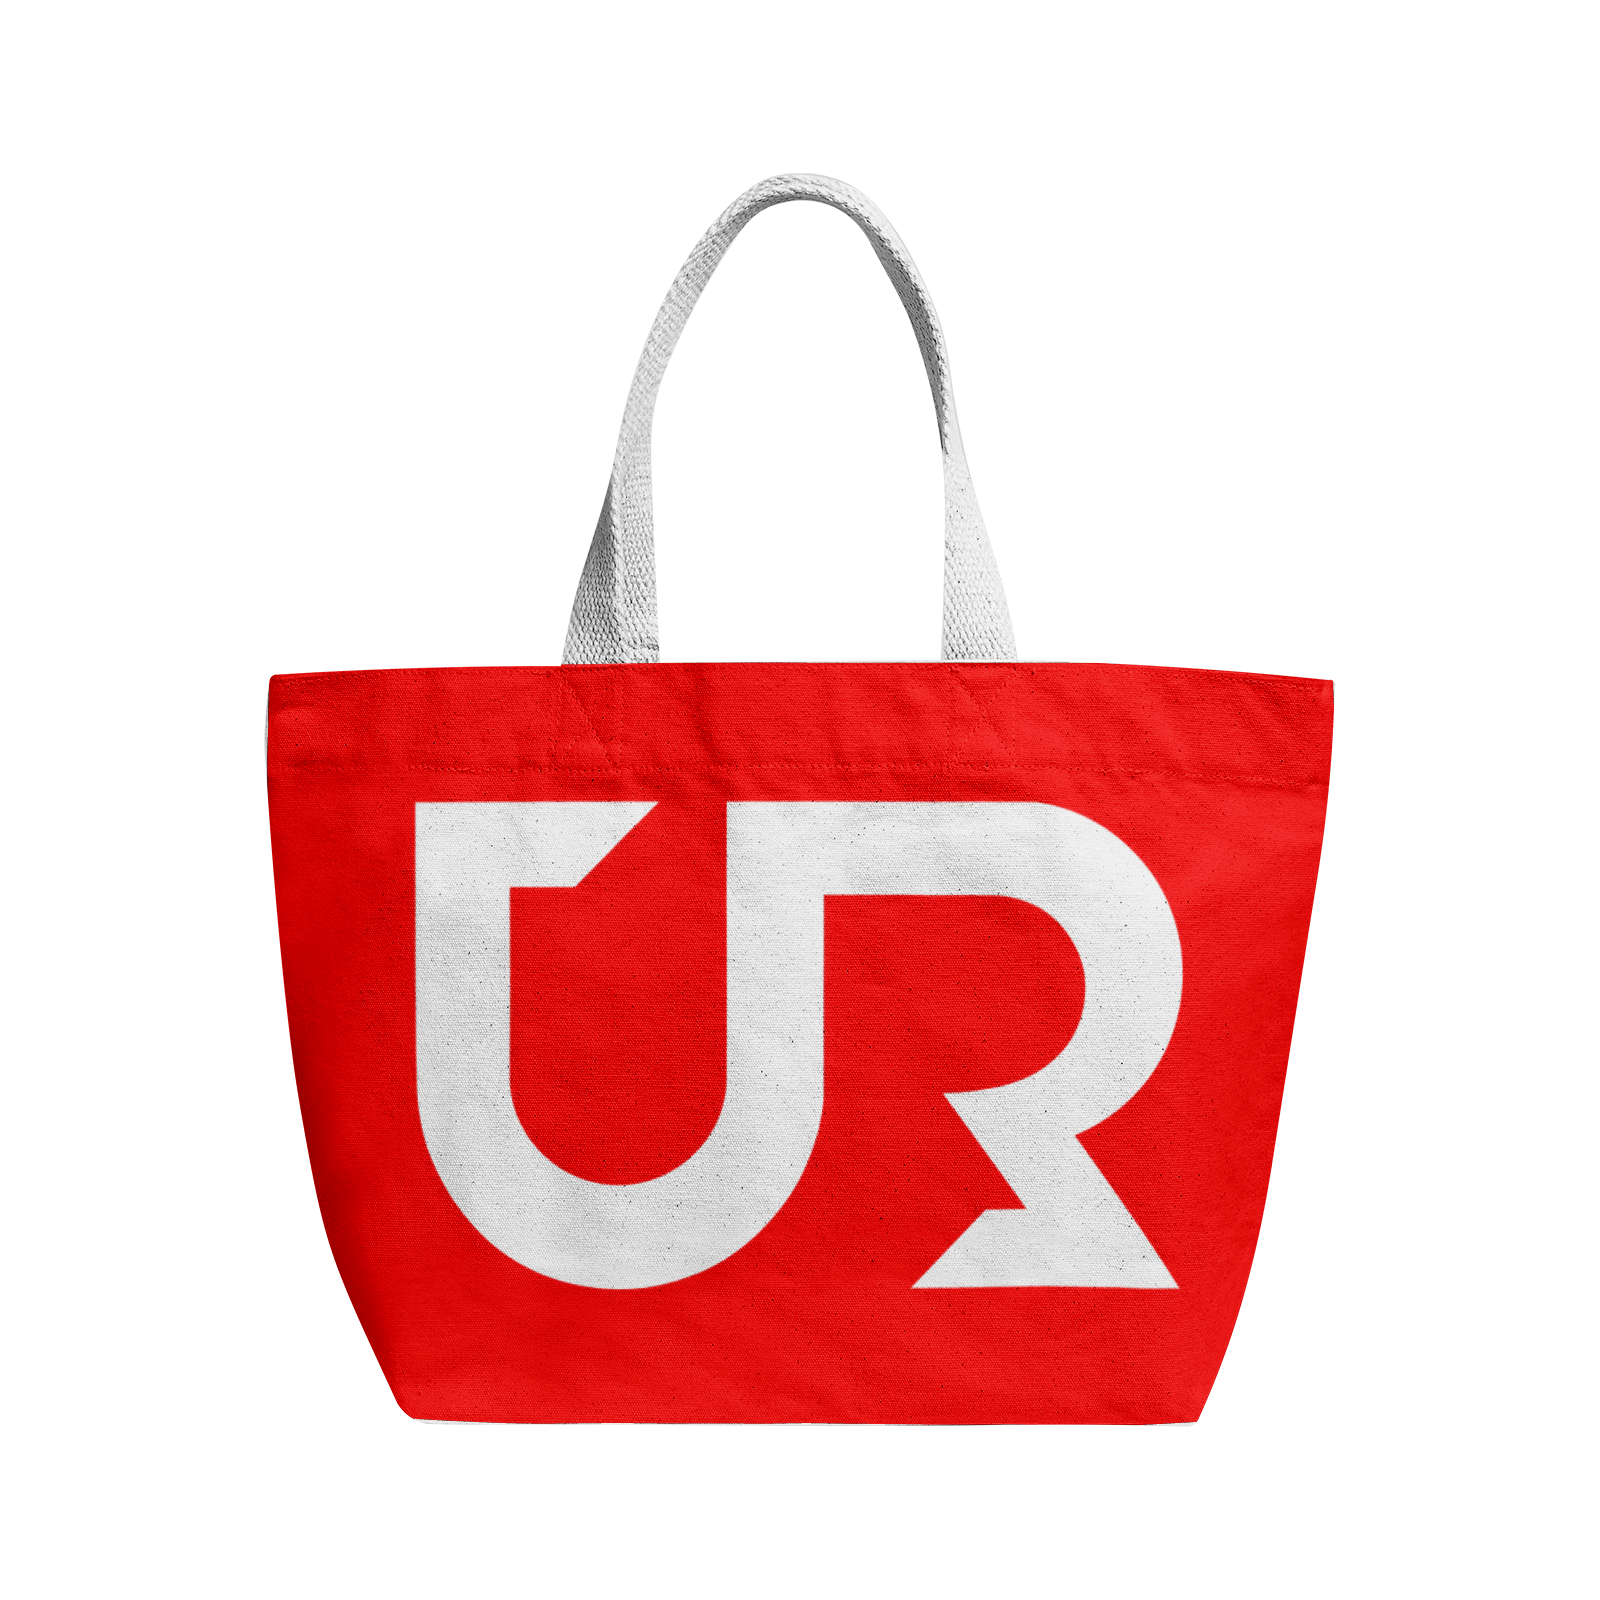 Heavy Duty and Strong Natural Cotton Canvas Tote Bag - UGO ROMANO URTB051